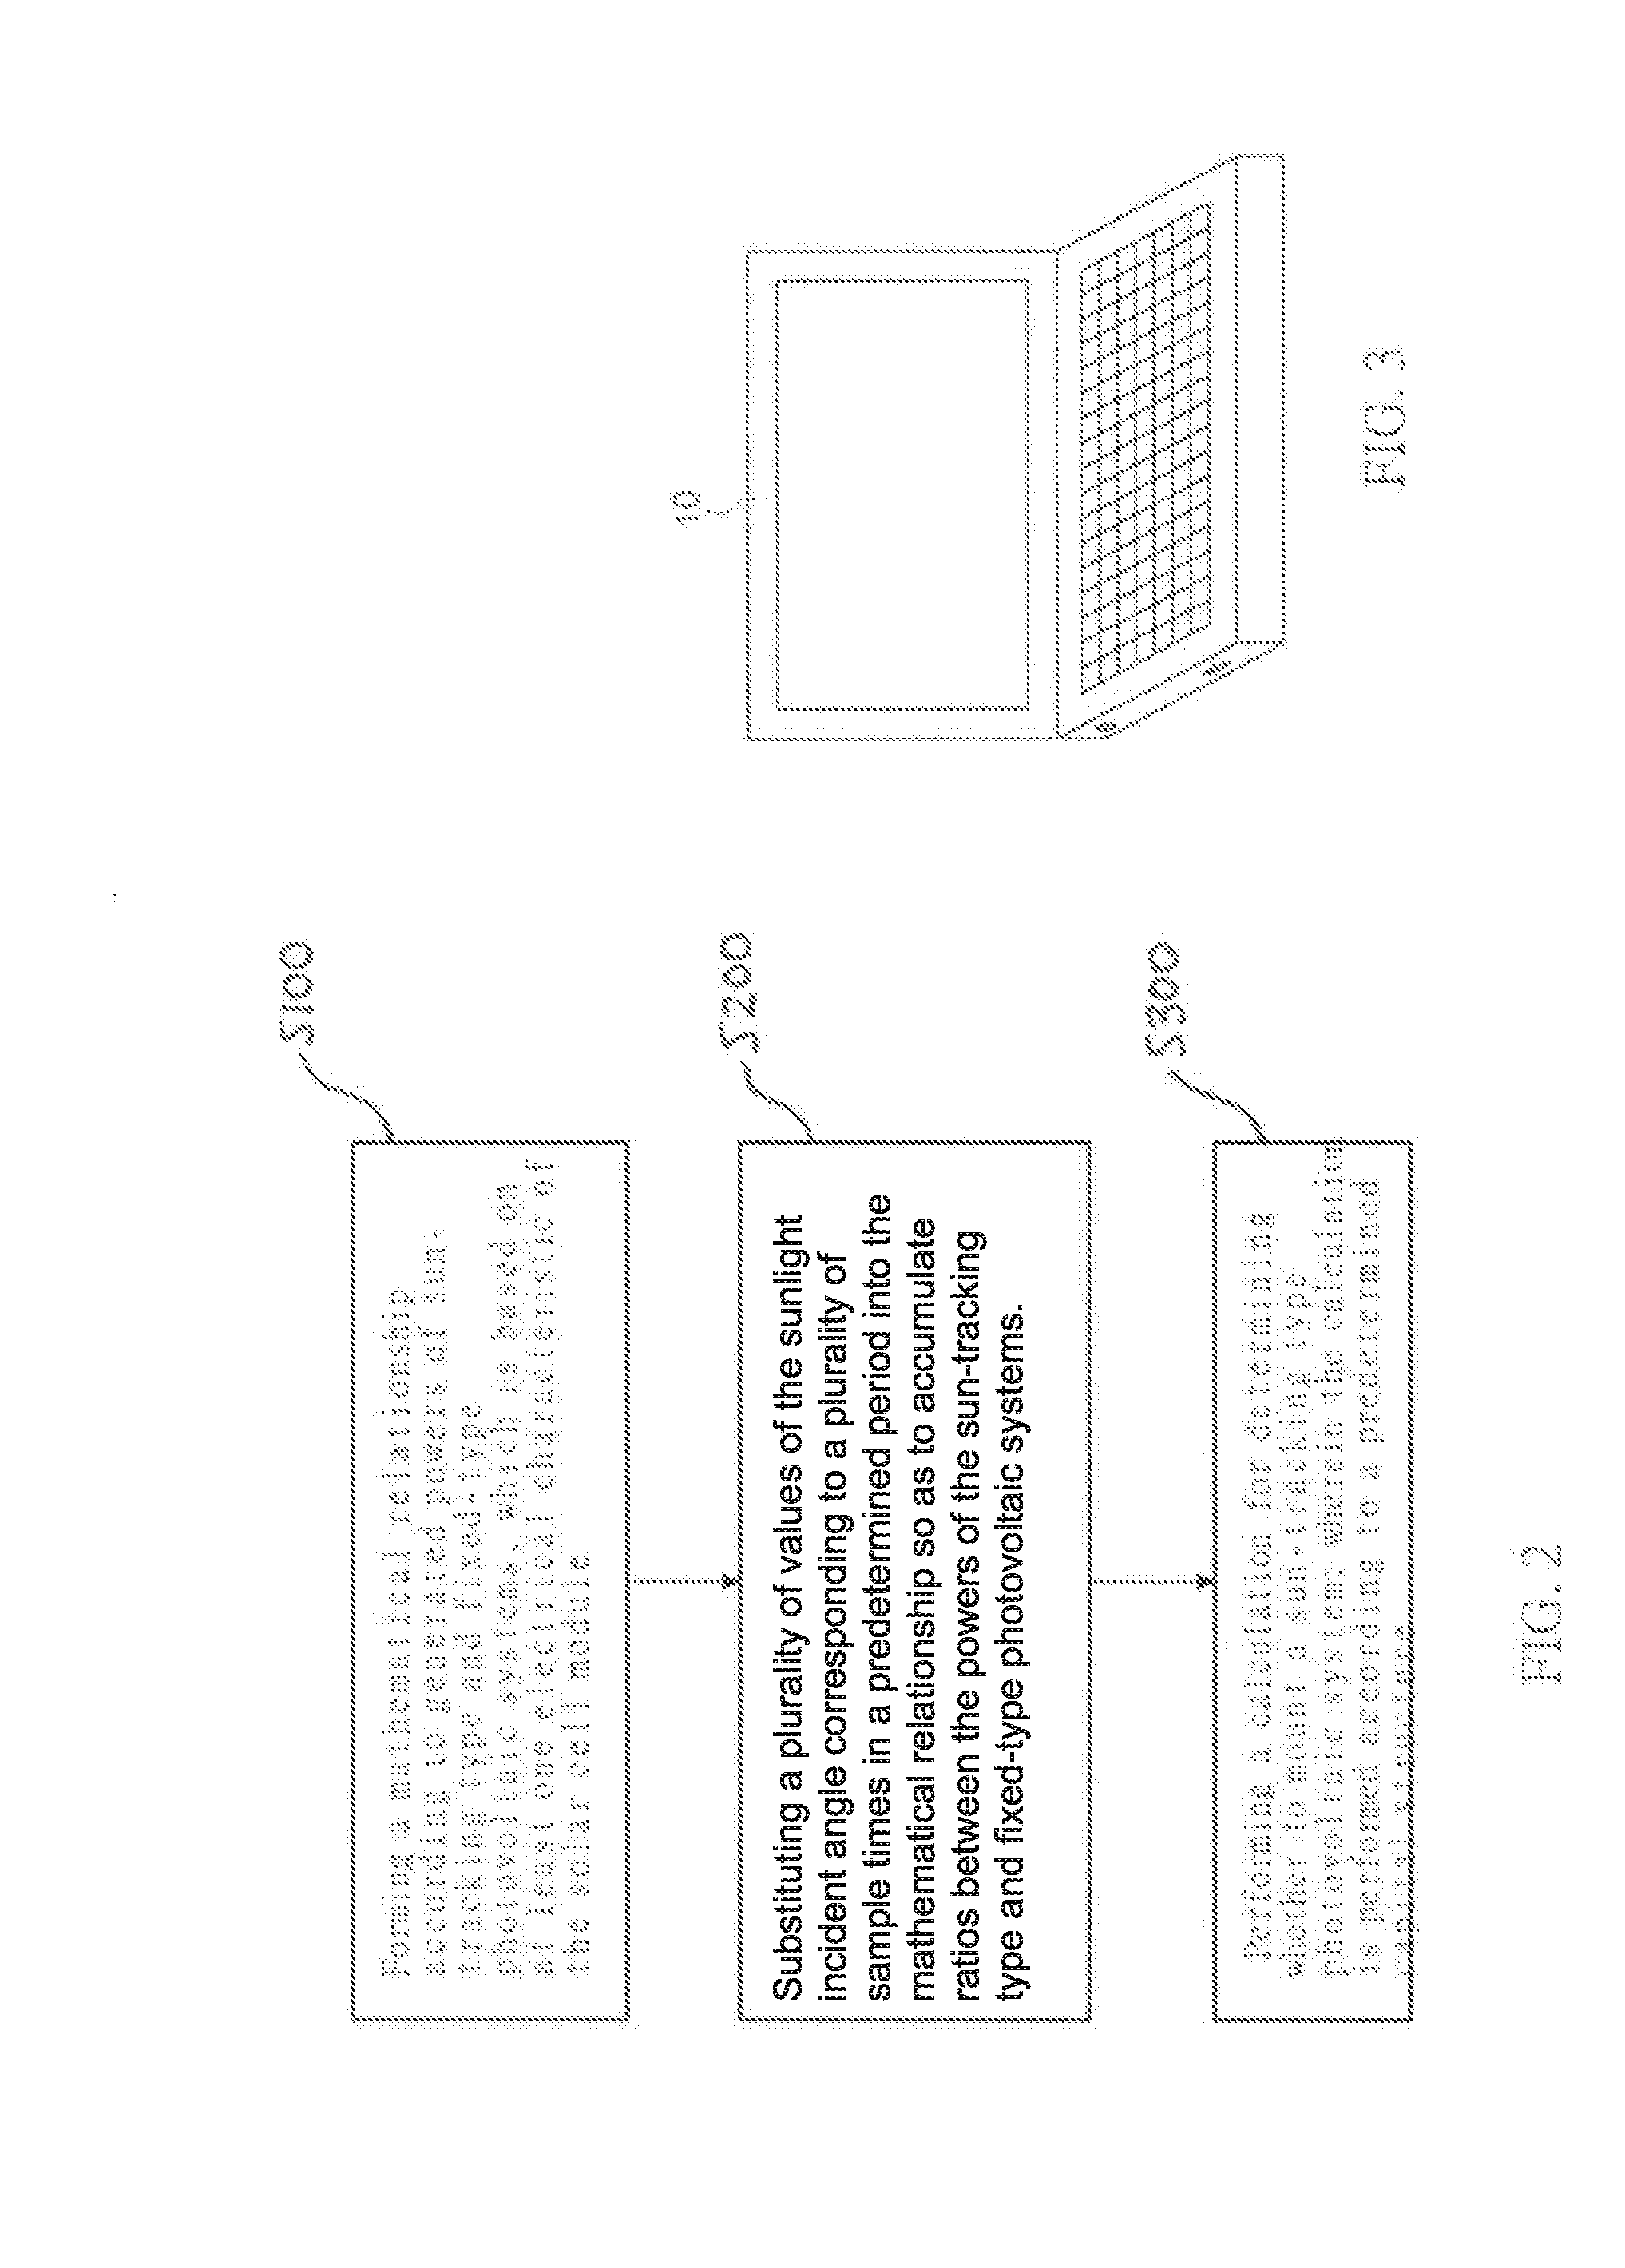 Prediction method for sun-tracking type photovoltaic system